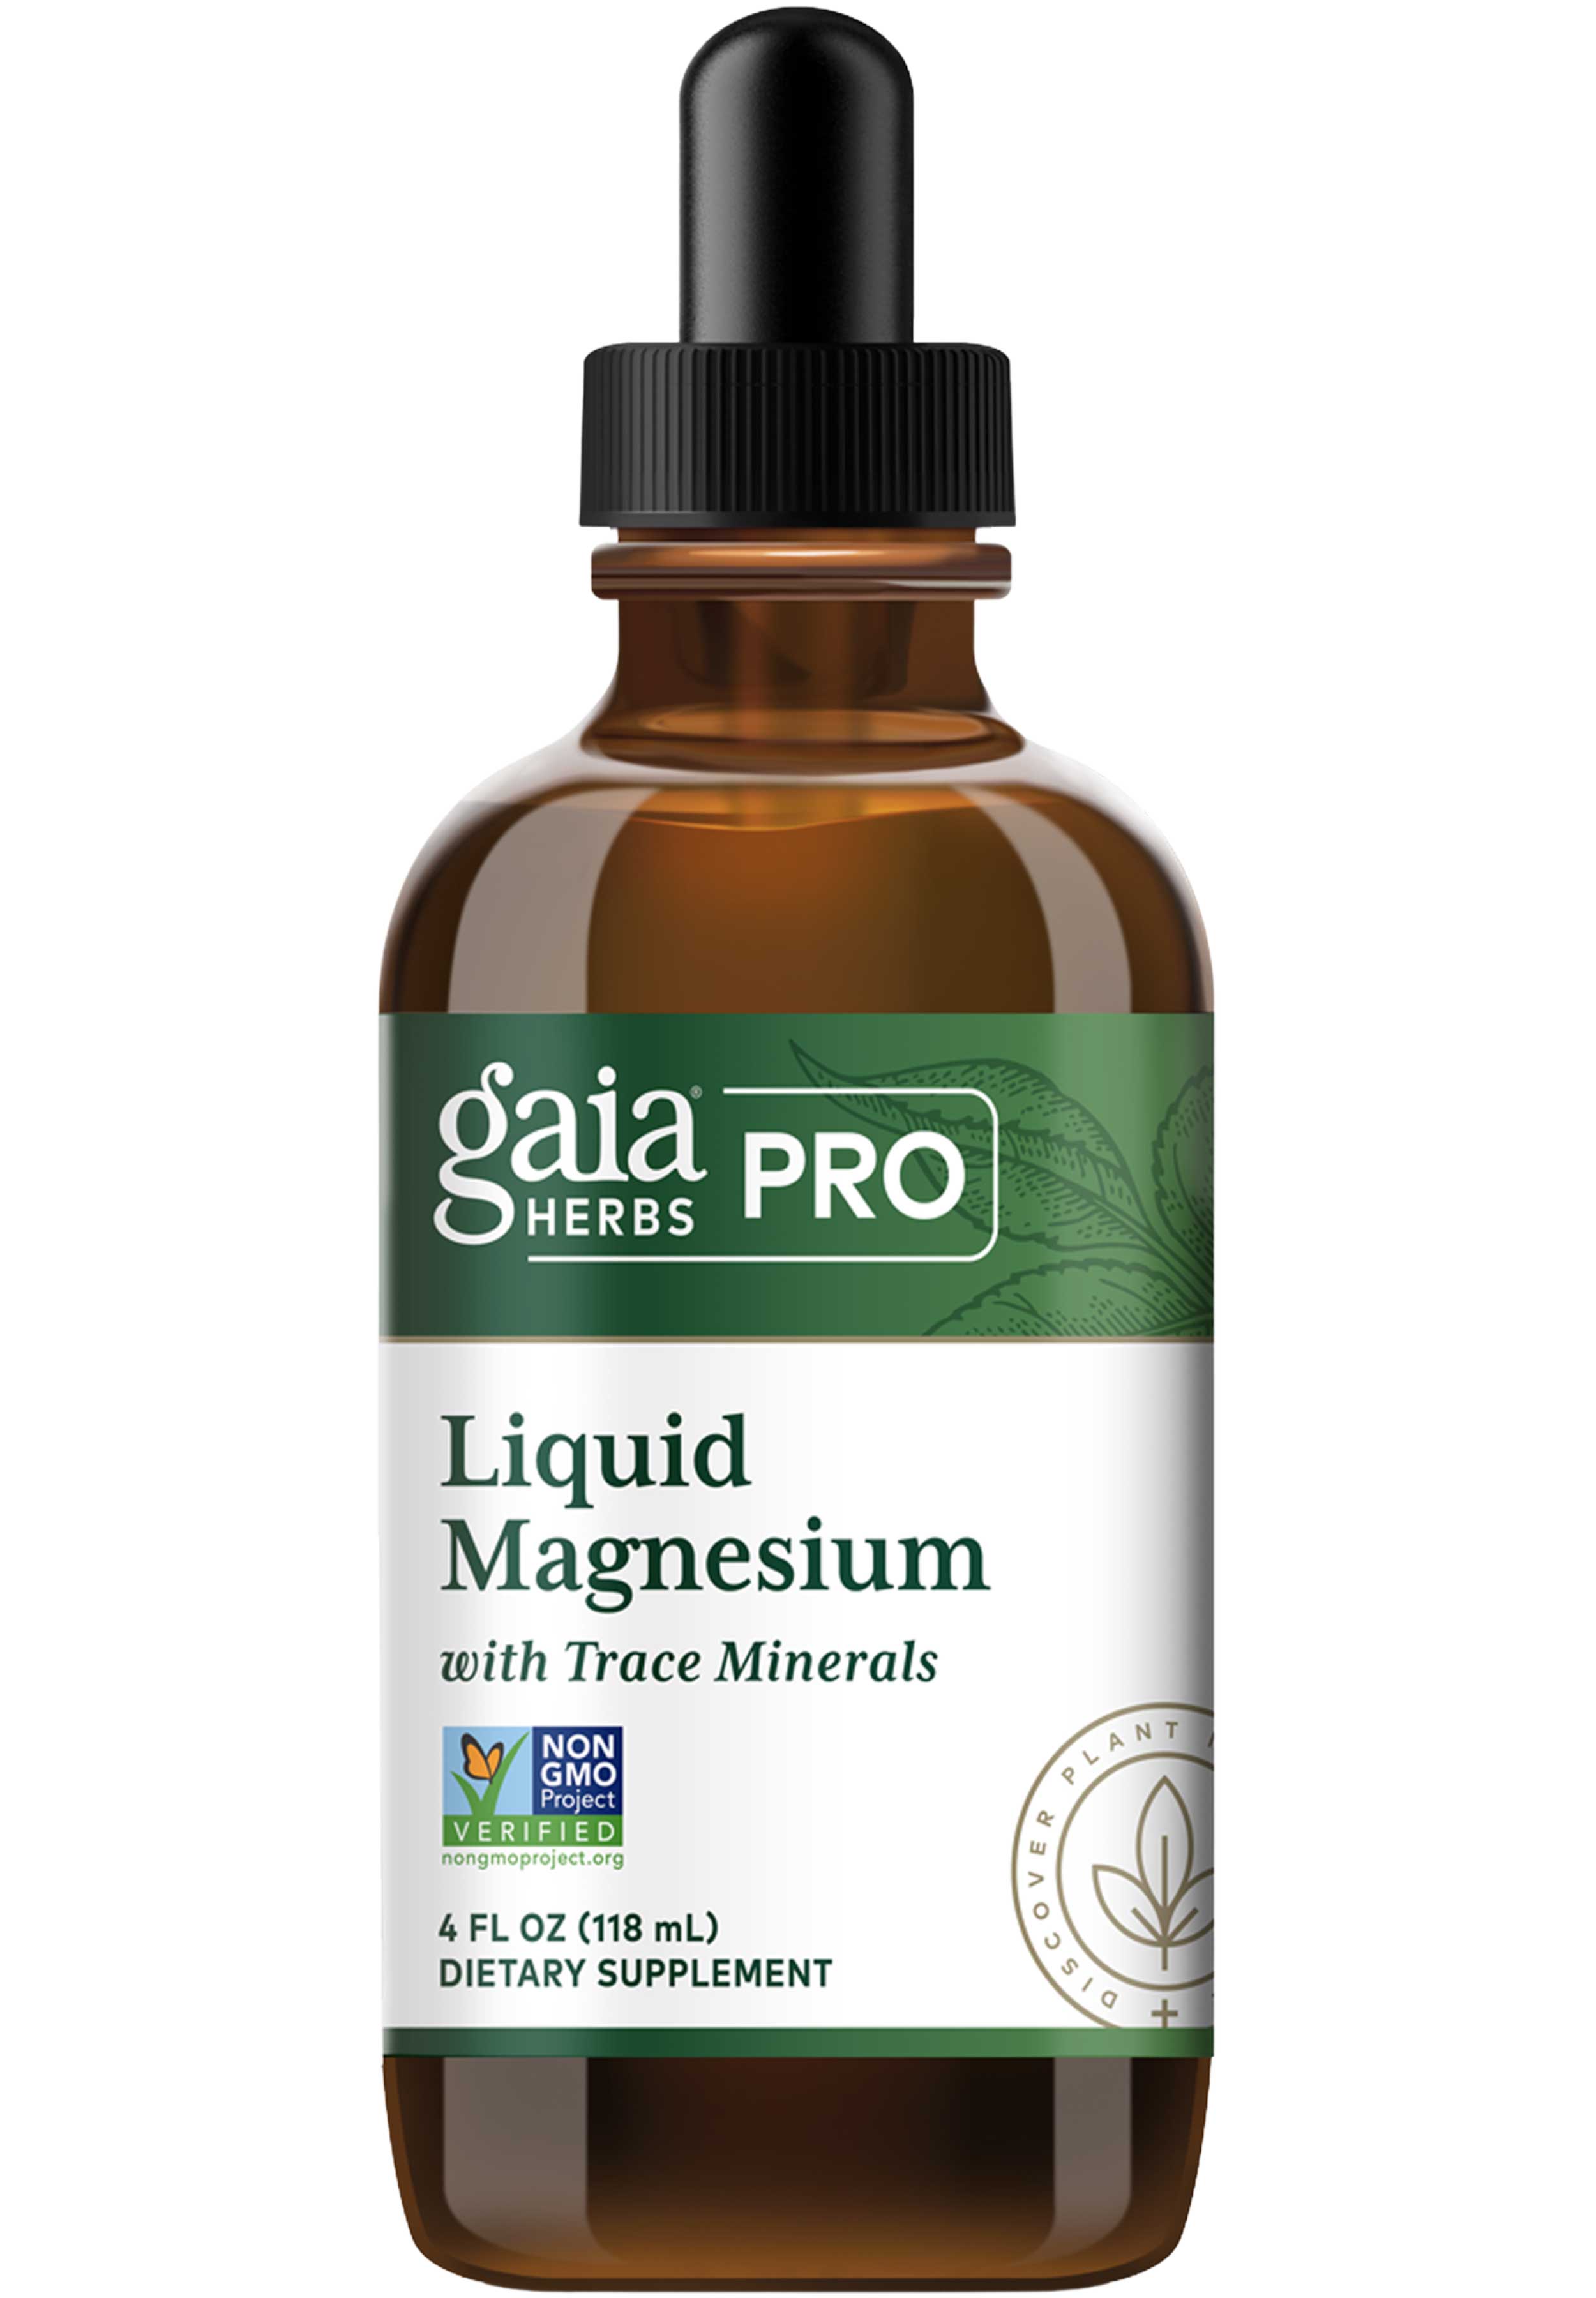 Gaia Herbs Professional Solutions Liquid Magnesium with Trace Minerals